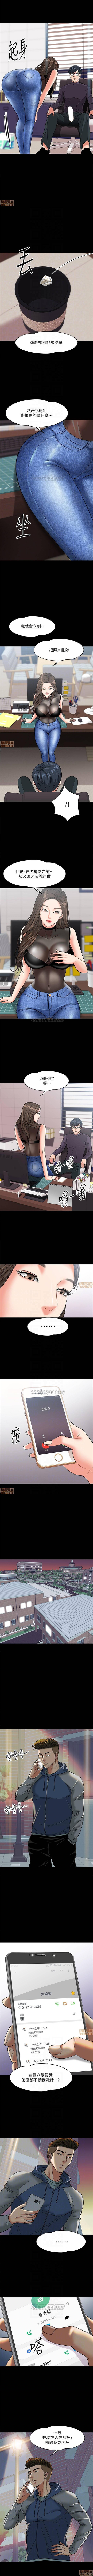 PROFESSOR, ARE YOU JUST GOING TO LOOK AT ME? | DESIRE SWAMP | 教授，你還等什麼? Ch. 5Manhwa 4